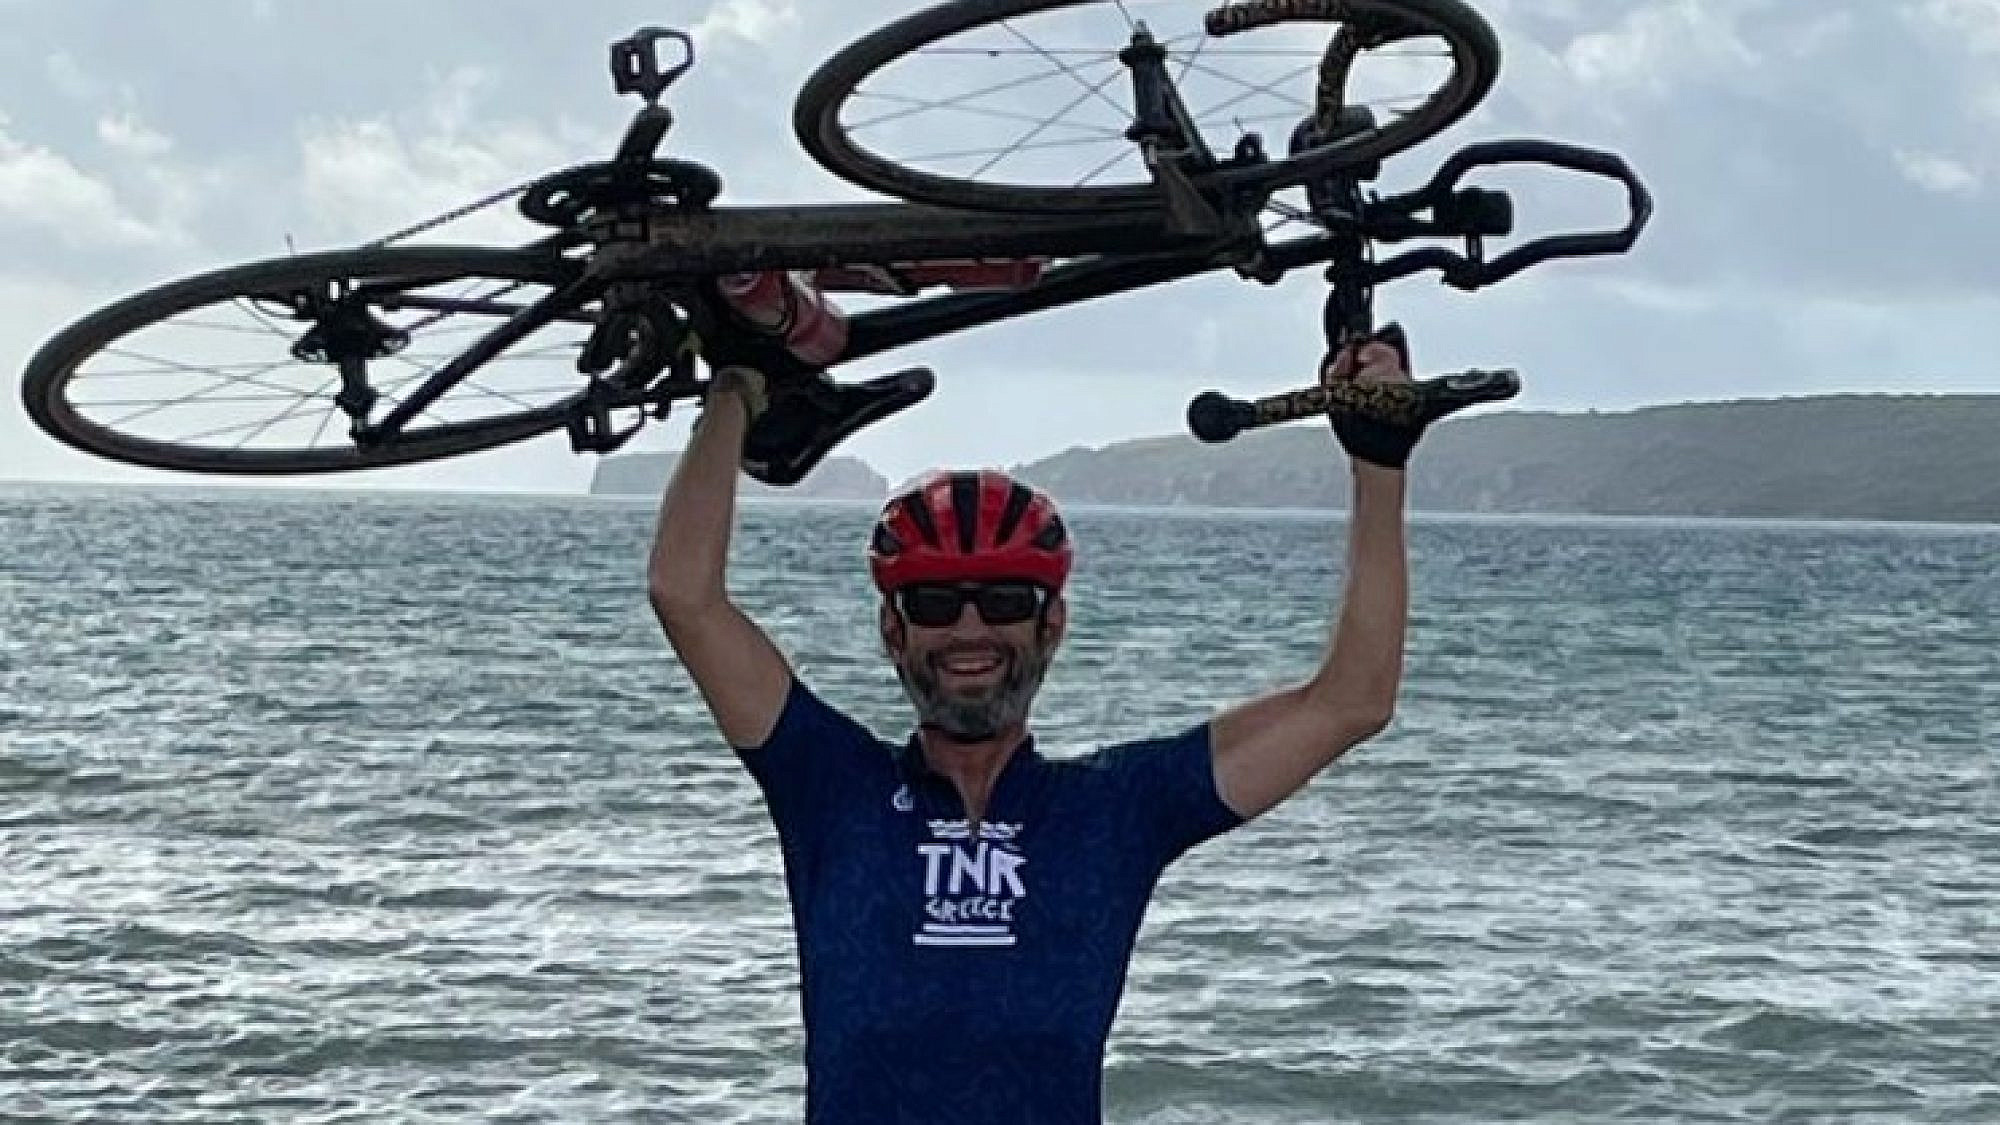 Alan Aharon Newman in Greece, cycling for The Next Ride. Photo: Courtesy of Alan Aharon Newman.